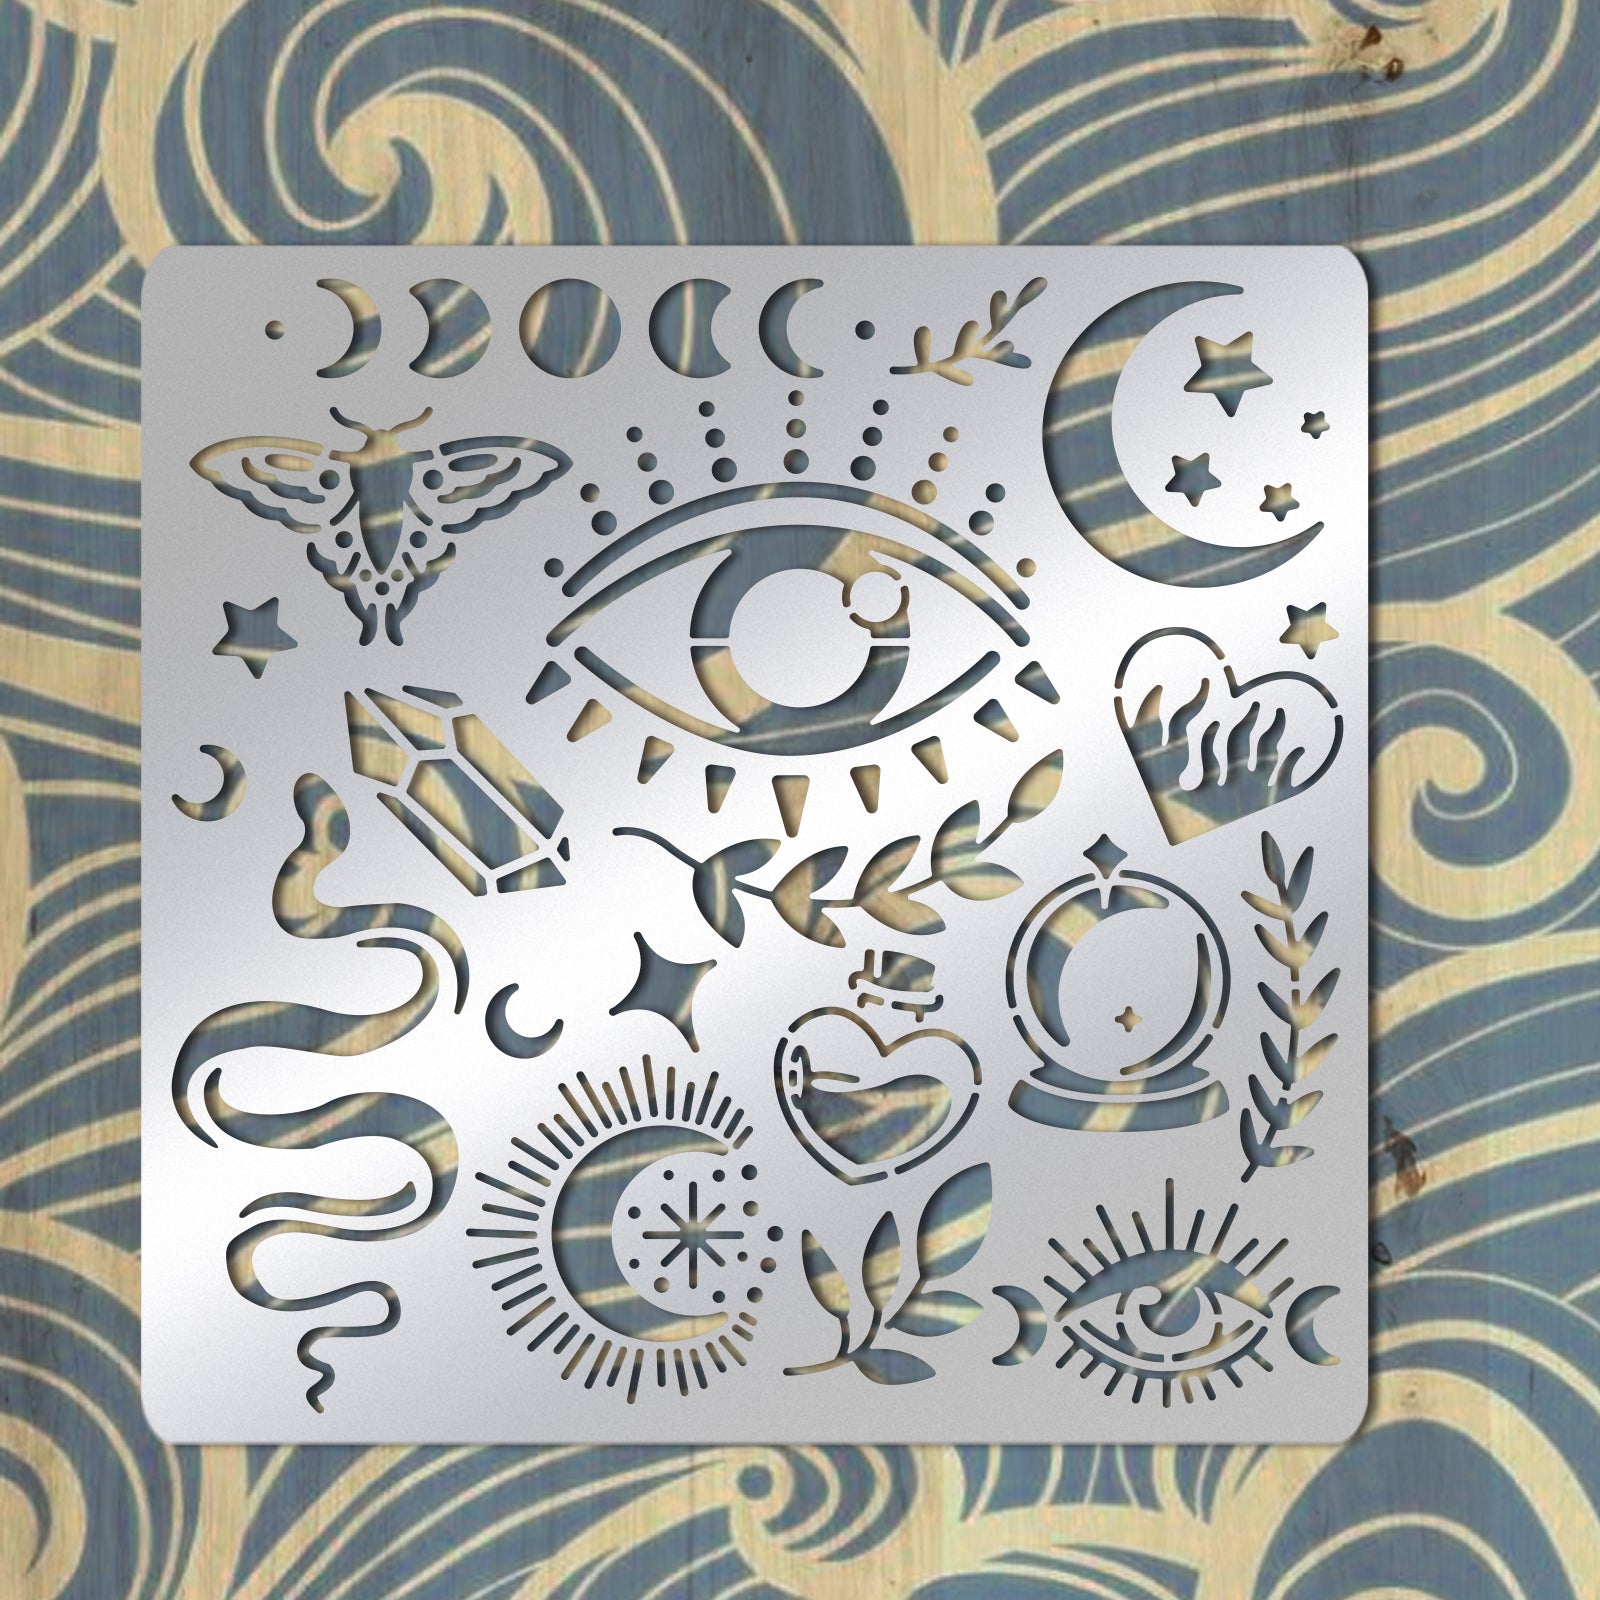 CRASPIRE Stainless Steel Cutting Dies Stencils, for DIY Scrapbooking/Photo Album, Decorative Embossing DIY Paper Card, Matte Style, Stainless Steel Color, Eye Pattern, 15.6x15.6cm